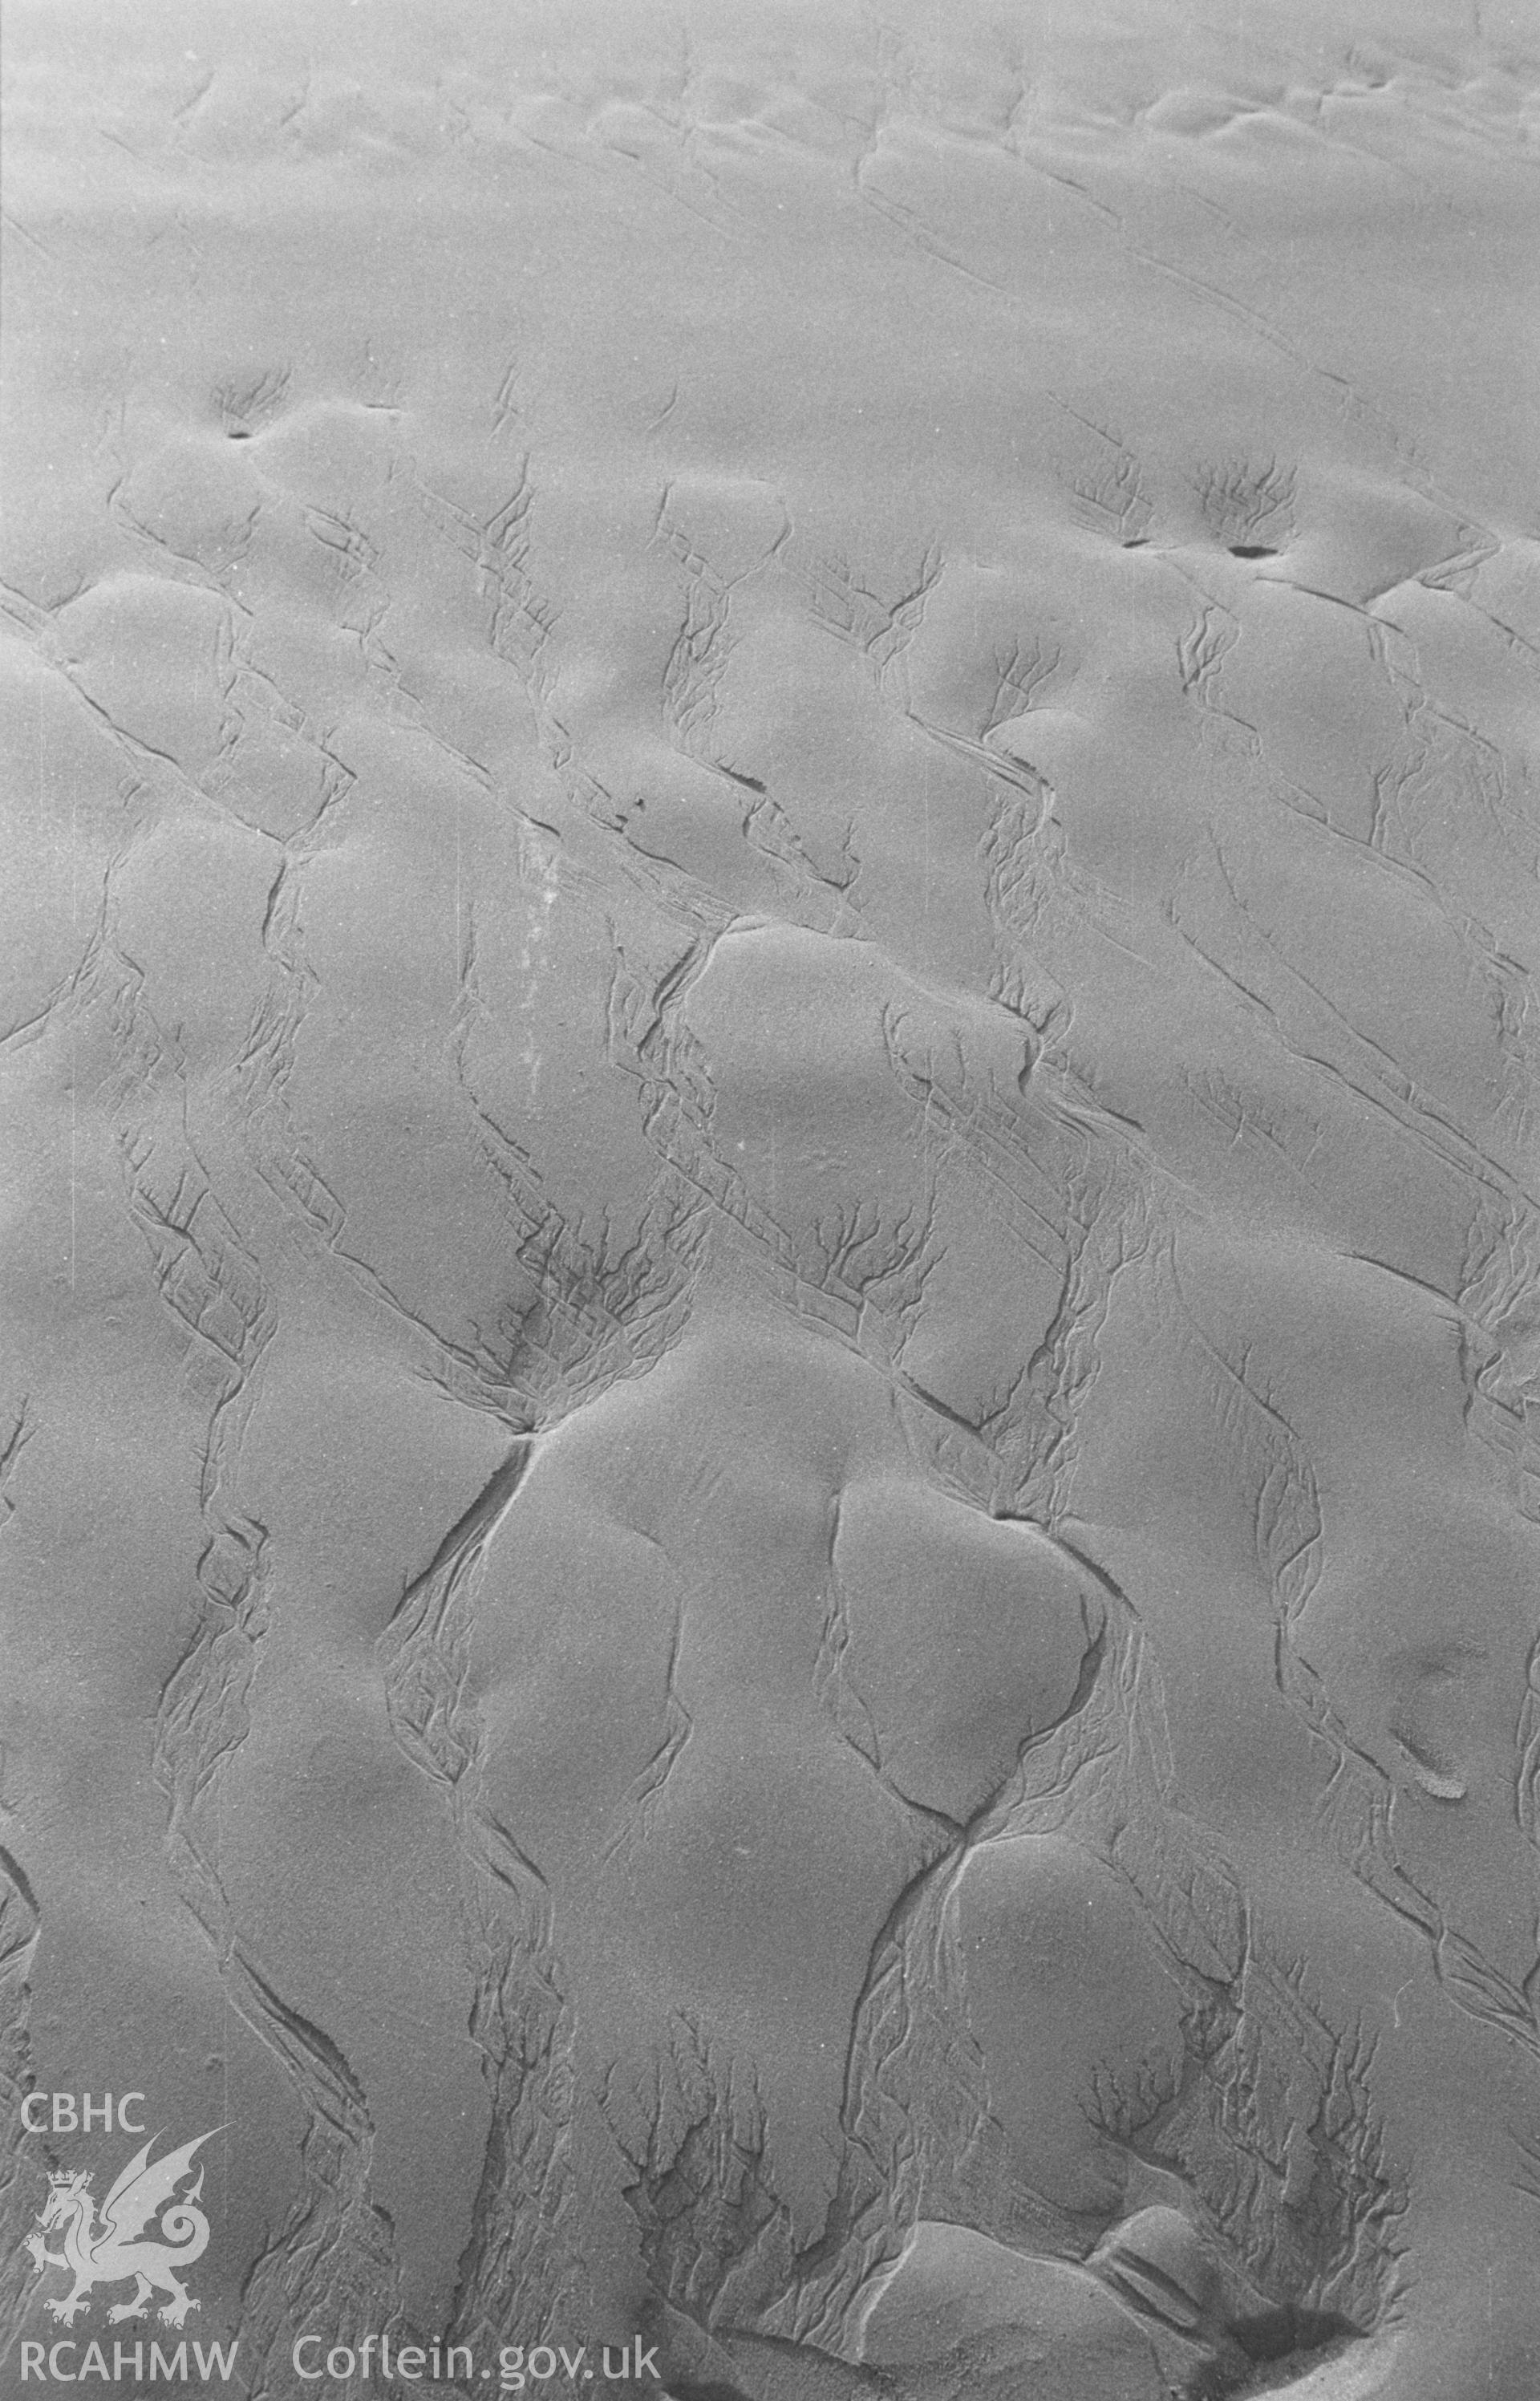 Digital copy of a black and white negative showing sand patterns on Poppit Sands, Cardigan. Photographed in December 1963 by Arthur O. Chater from Grid Reference c. SN 156 488.